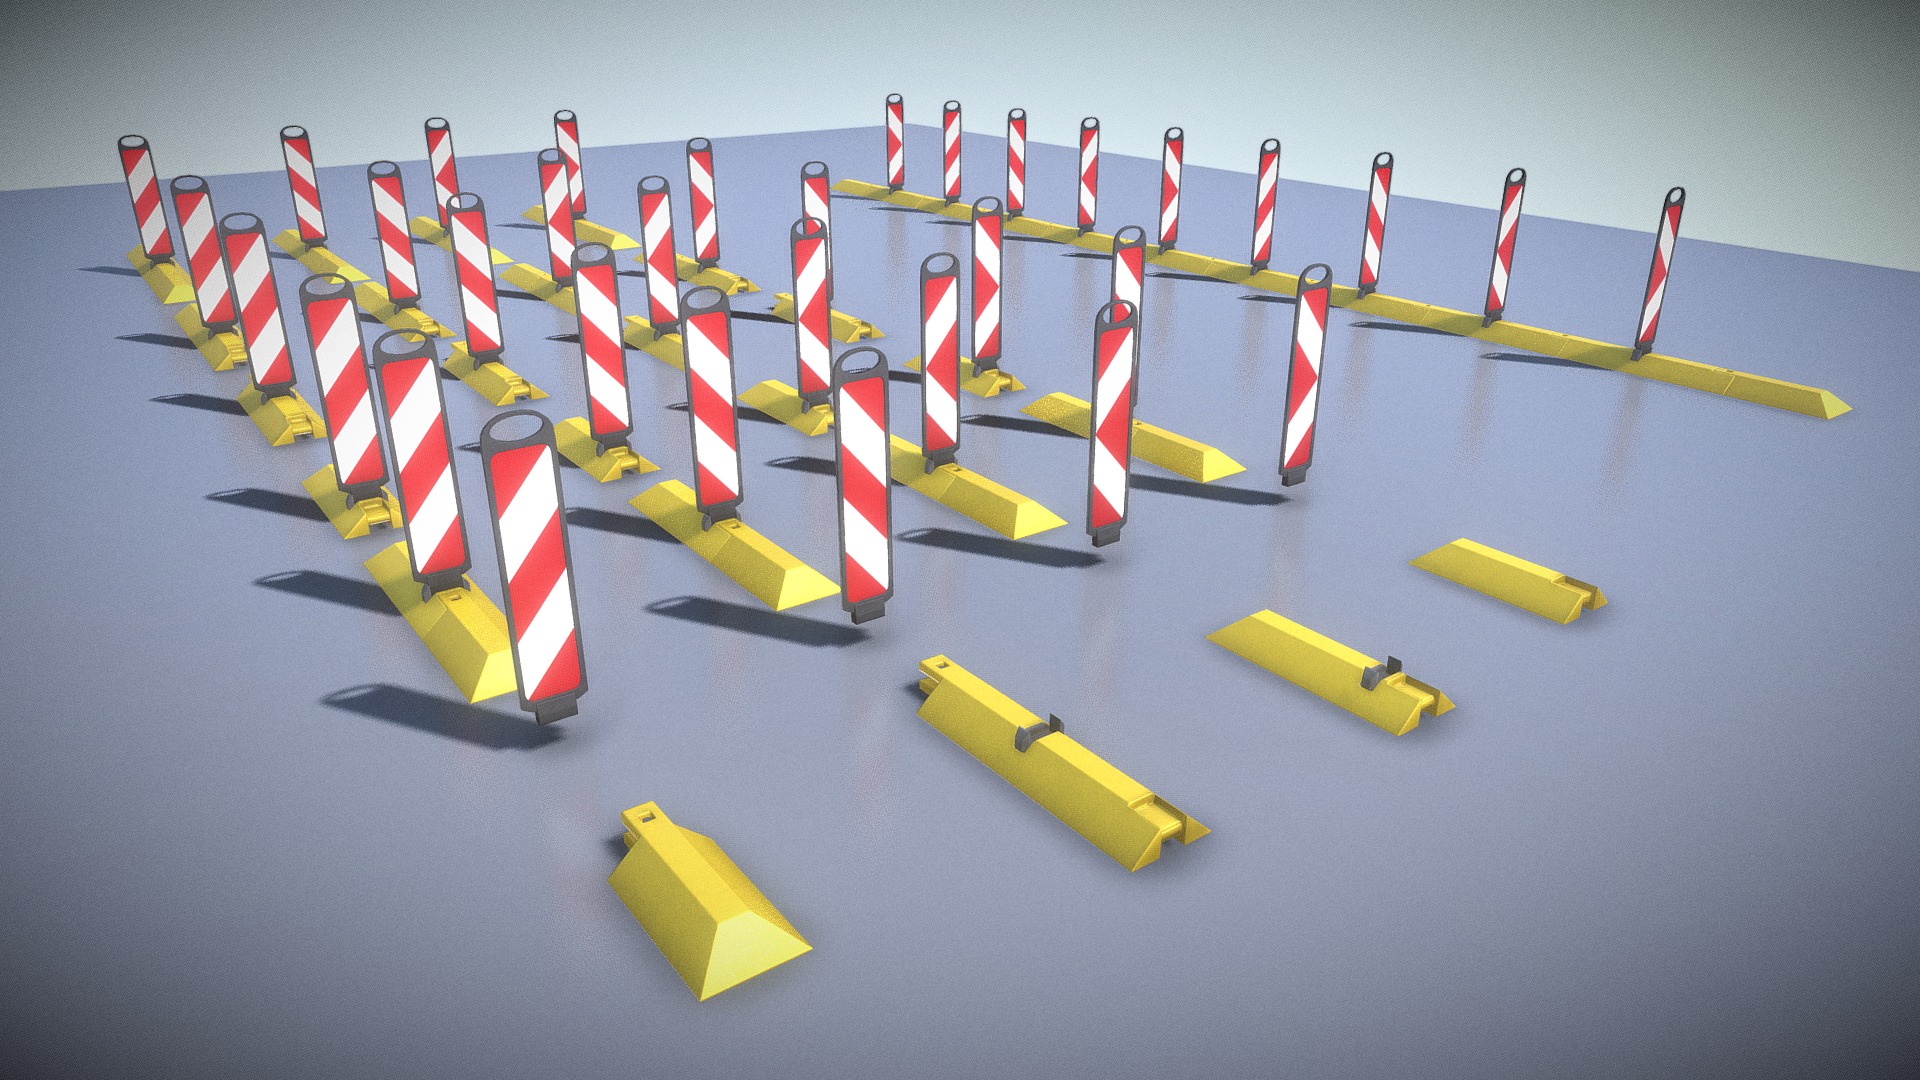 Here is a collection of 28 yellow guide barriers for roads and highways.


Eine Sammlung von 28 Leitschwellen mit gelben Standfuss  für Straßen und Autobahnen.


Textures(4k):


Color-map
Ambient-occlusion-map
Normal-map
Specular-map


3D-Model-Formats:


VRML (.wrl, .wrz) 
X3D (.x3d) 
3D Studio (.3ds) 
Collada (.dae) 
DXF (.dxf) 
Autodesk FBX (.fbx) 
Agisoft Photoscan (.ply) 
Stereolithography (.stl) 
OBJ (.obj, .mtl) 
Alembic (.abc)
DirectX (.X) 
Blender(.blend) 

 - Highway Guide Barriers with Yellow Feets - Buy Royalty Free 3D model by VIS-All-3D (@VIS-All) 3d model